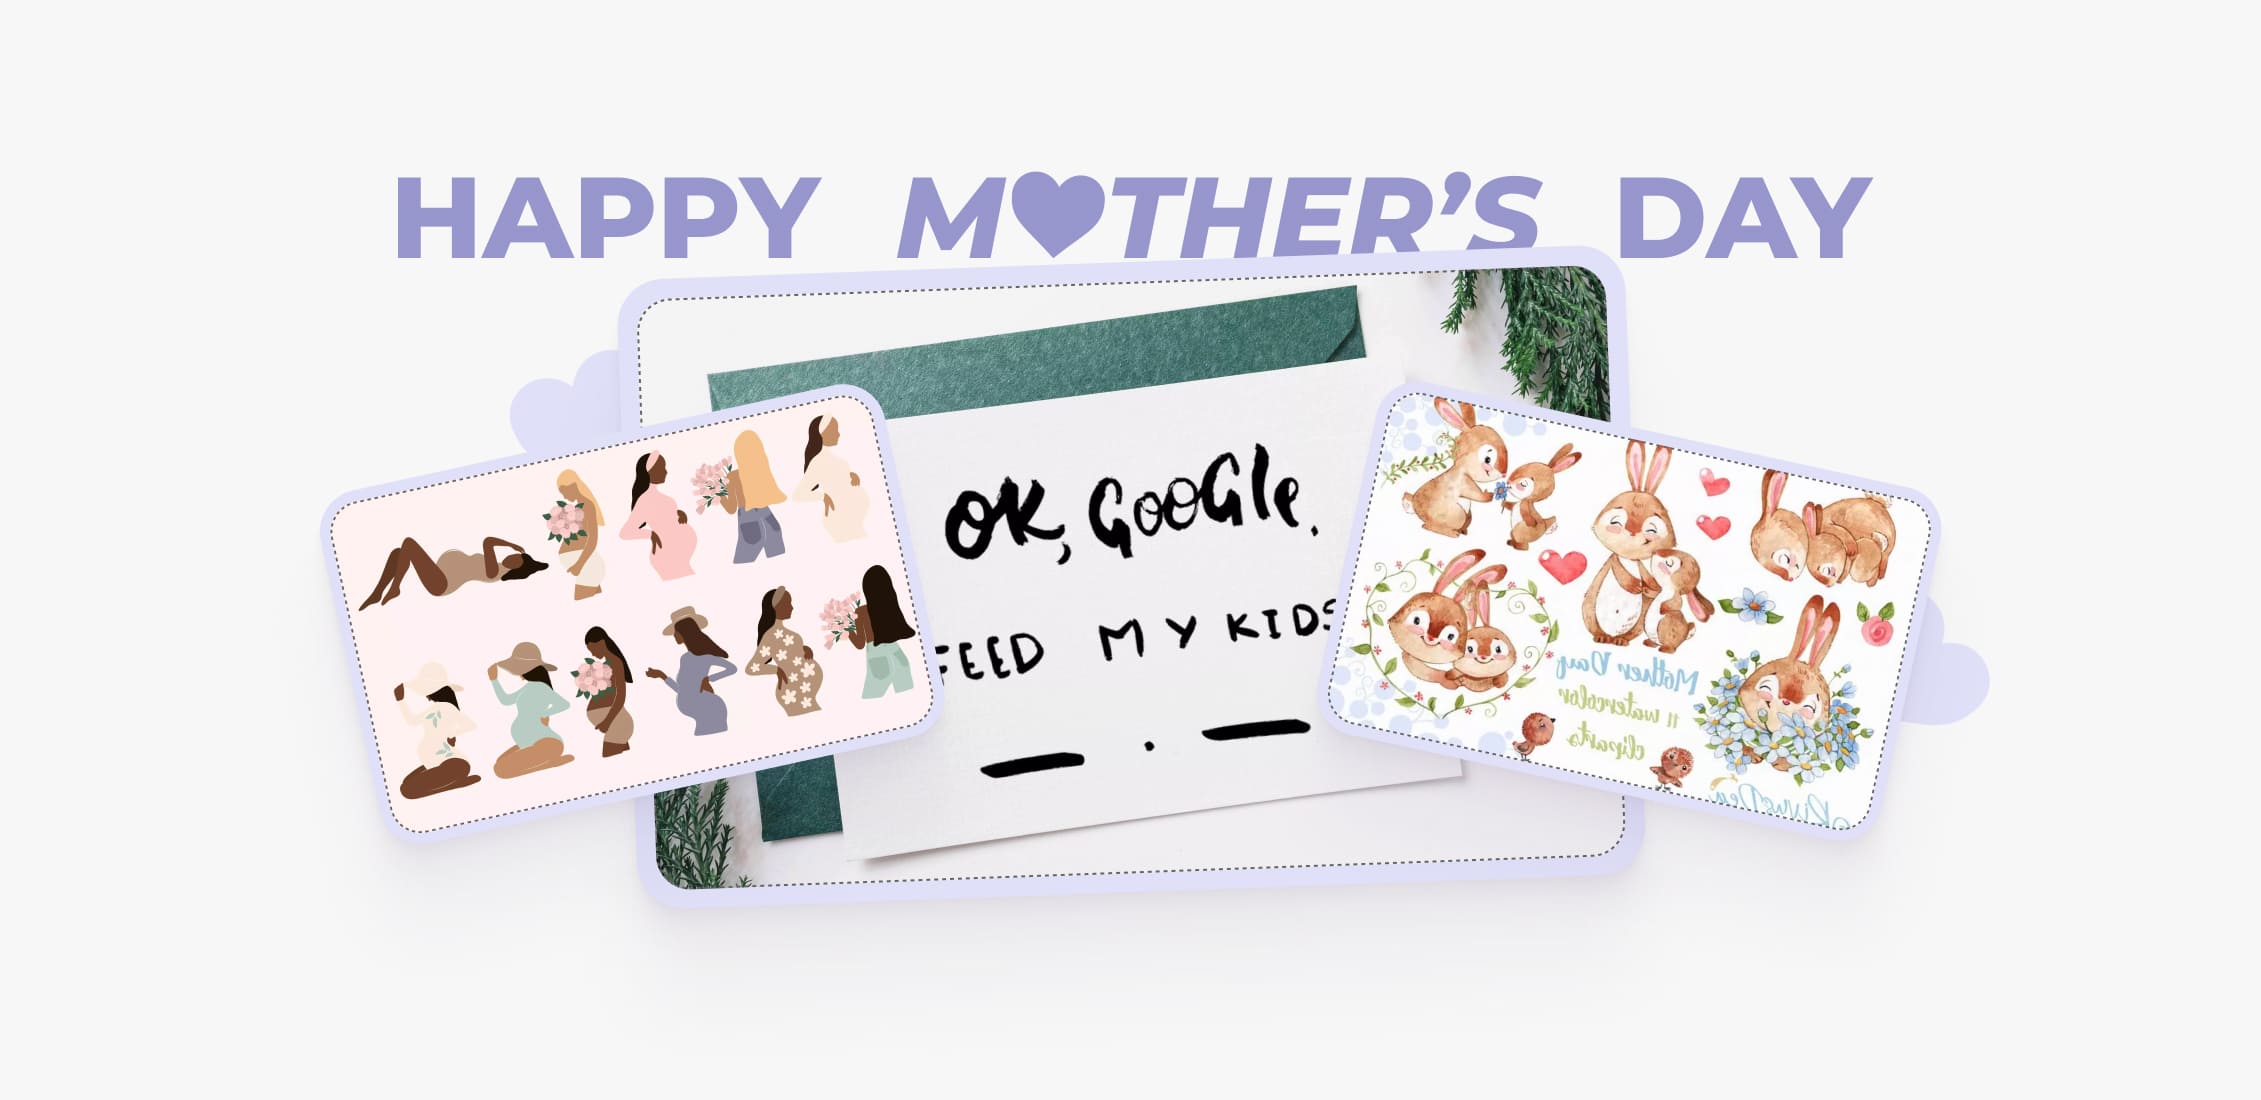 A mother's day card with a picture of a mother and her children.